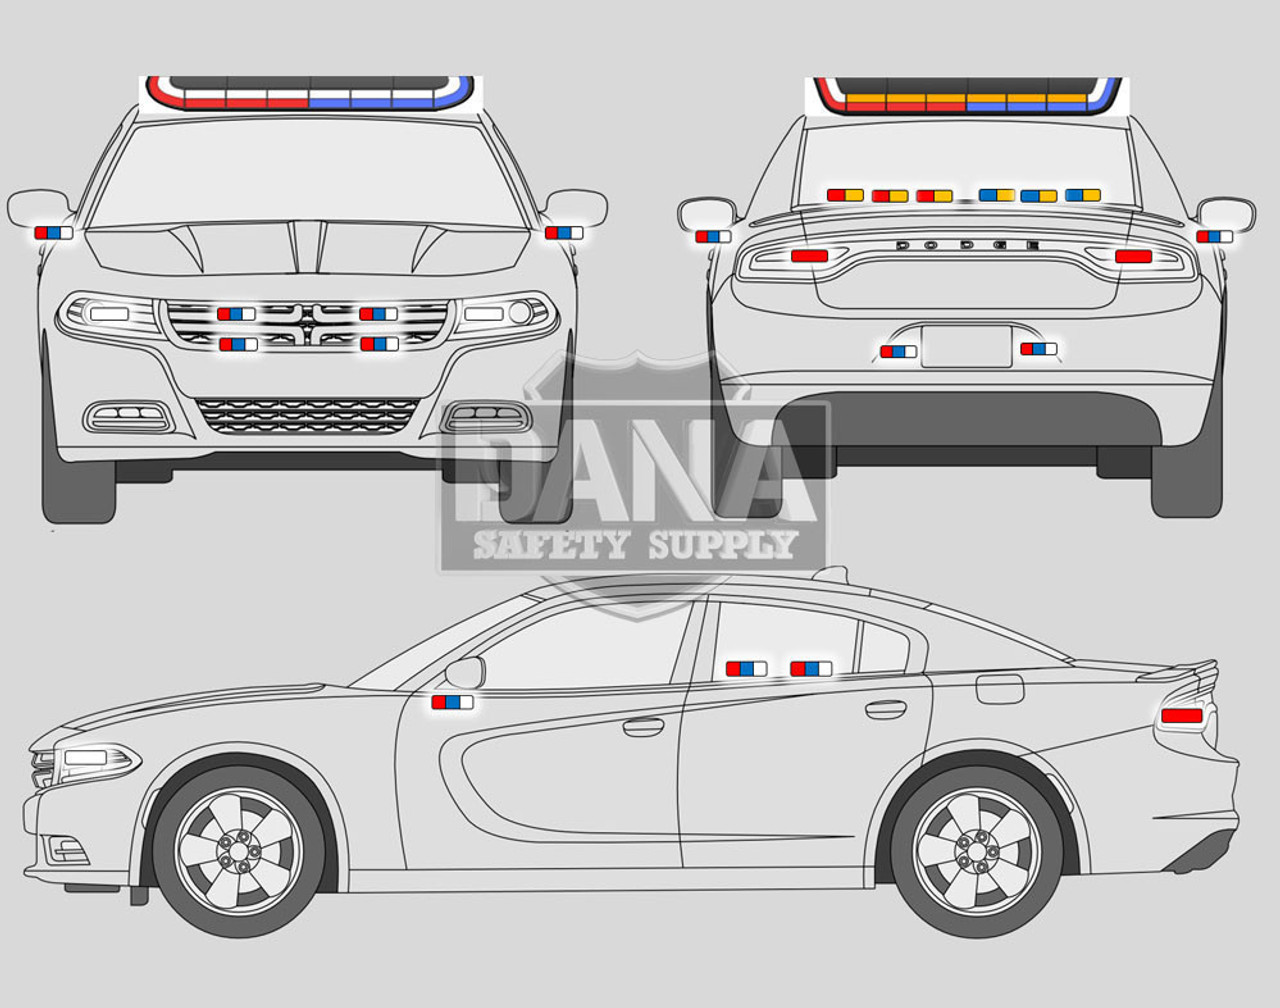 New 2023 Gray Dodge Charger PPV V8 RWD ready to be built as a Marked Patrol Package Police Pursuit Car (Emergency Lighting, Siren, Controller, Partition, Window Bars, etc.), + Delivery, G4